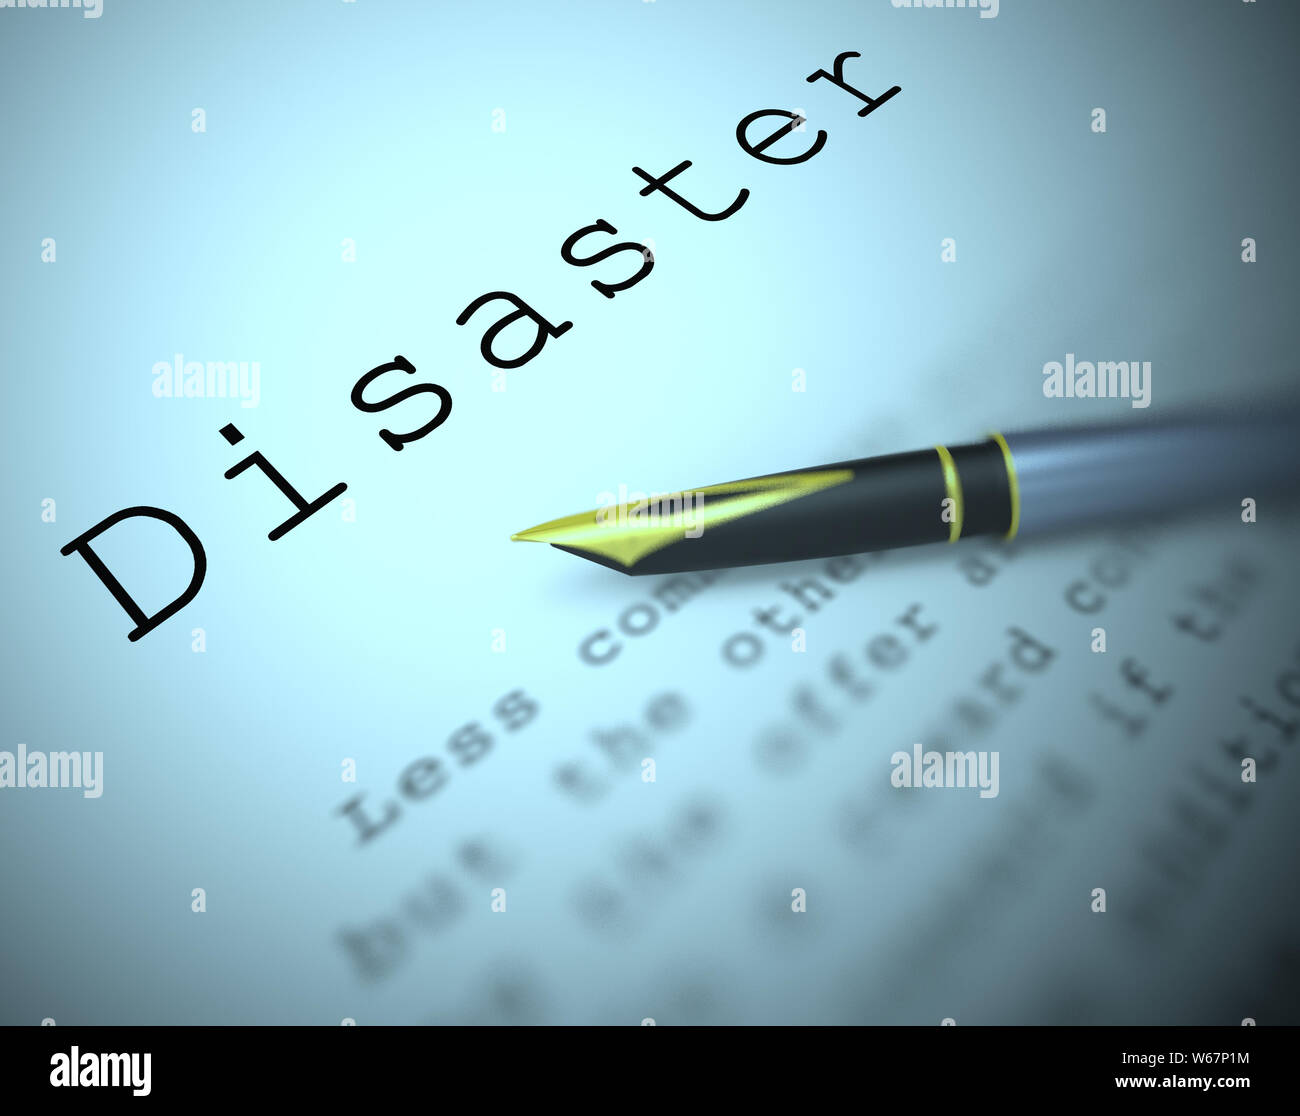 Disaster definition means calamity and misfortune.  An emergency causing bad fortune and sorrow - 3d illustration Stock Photo